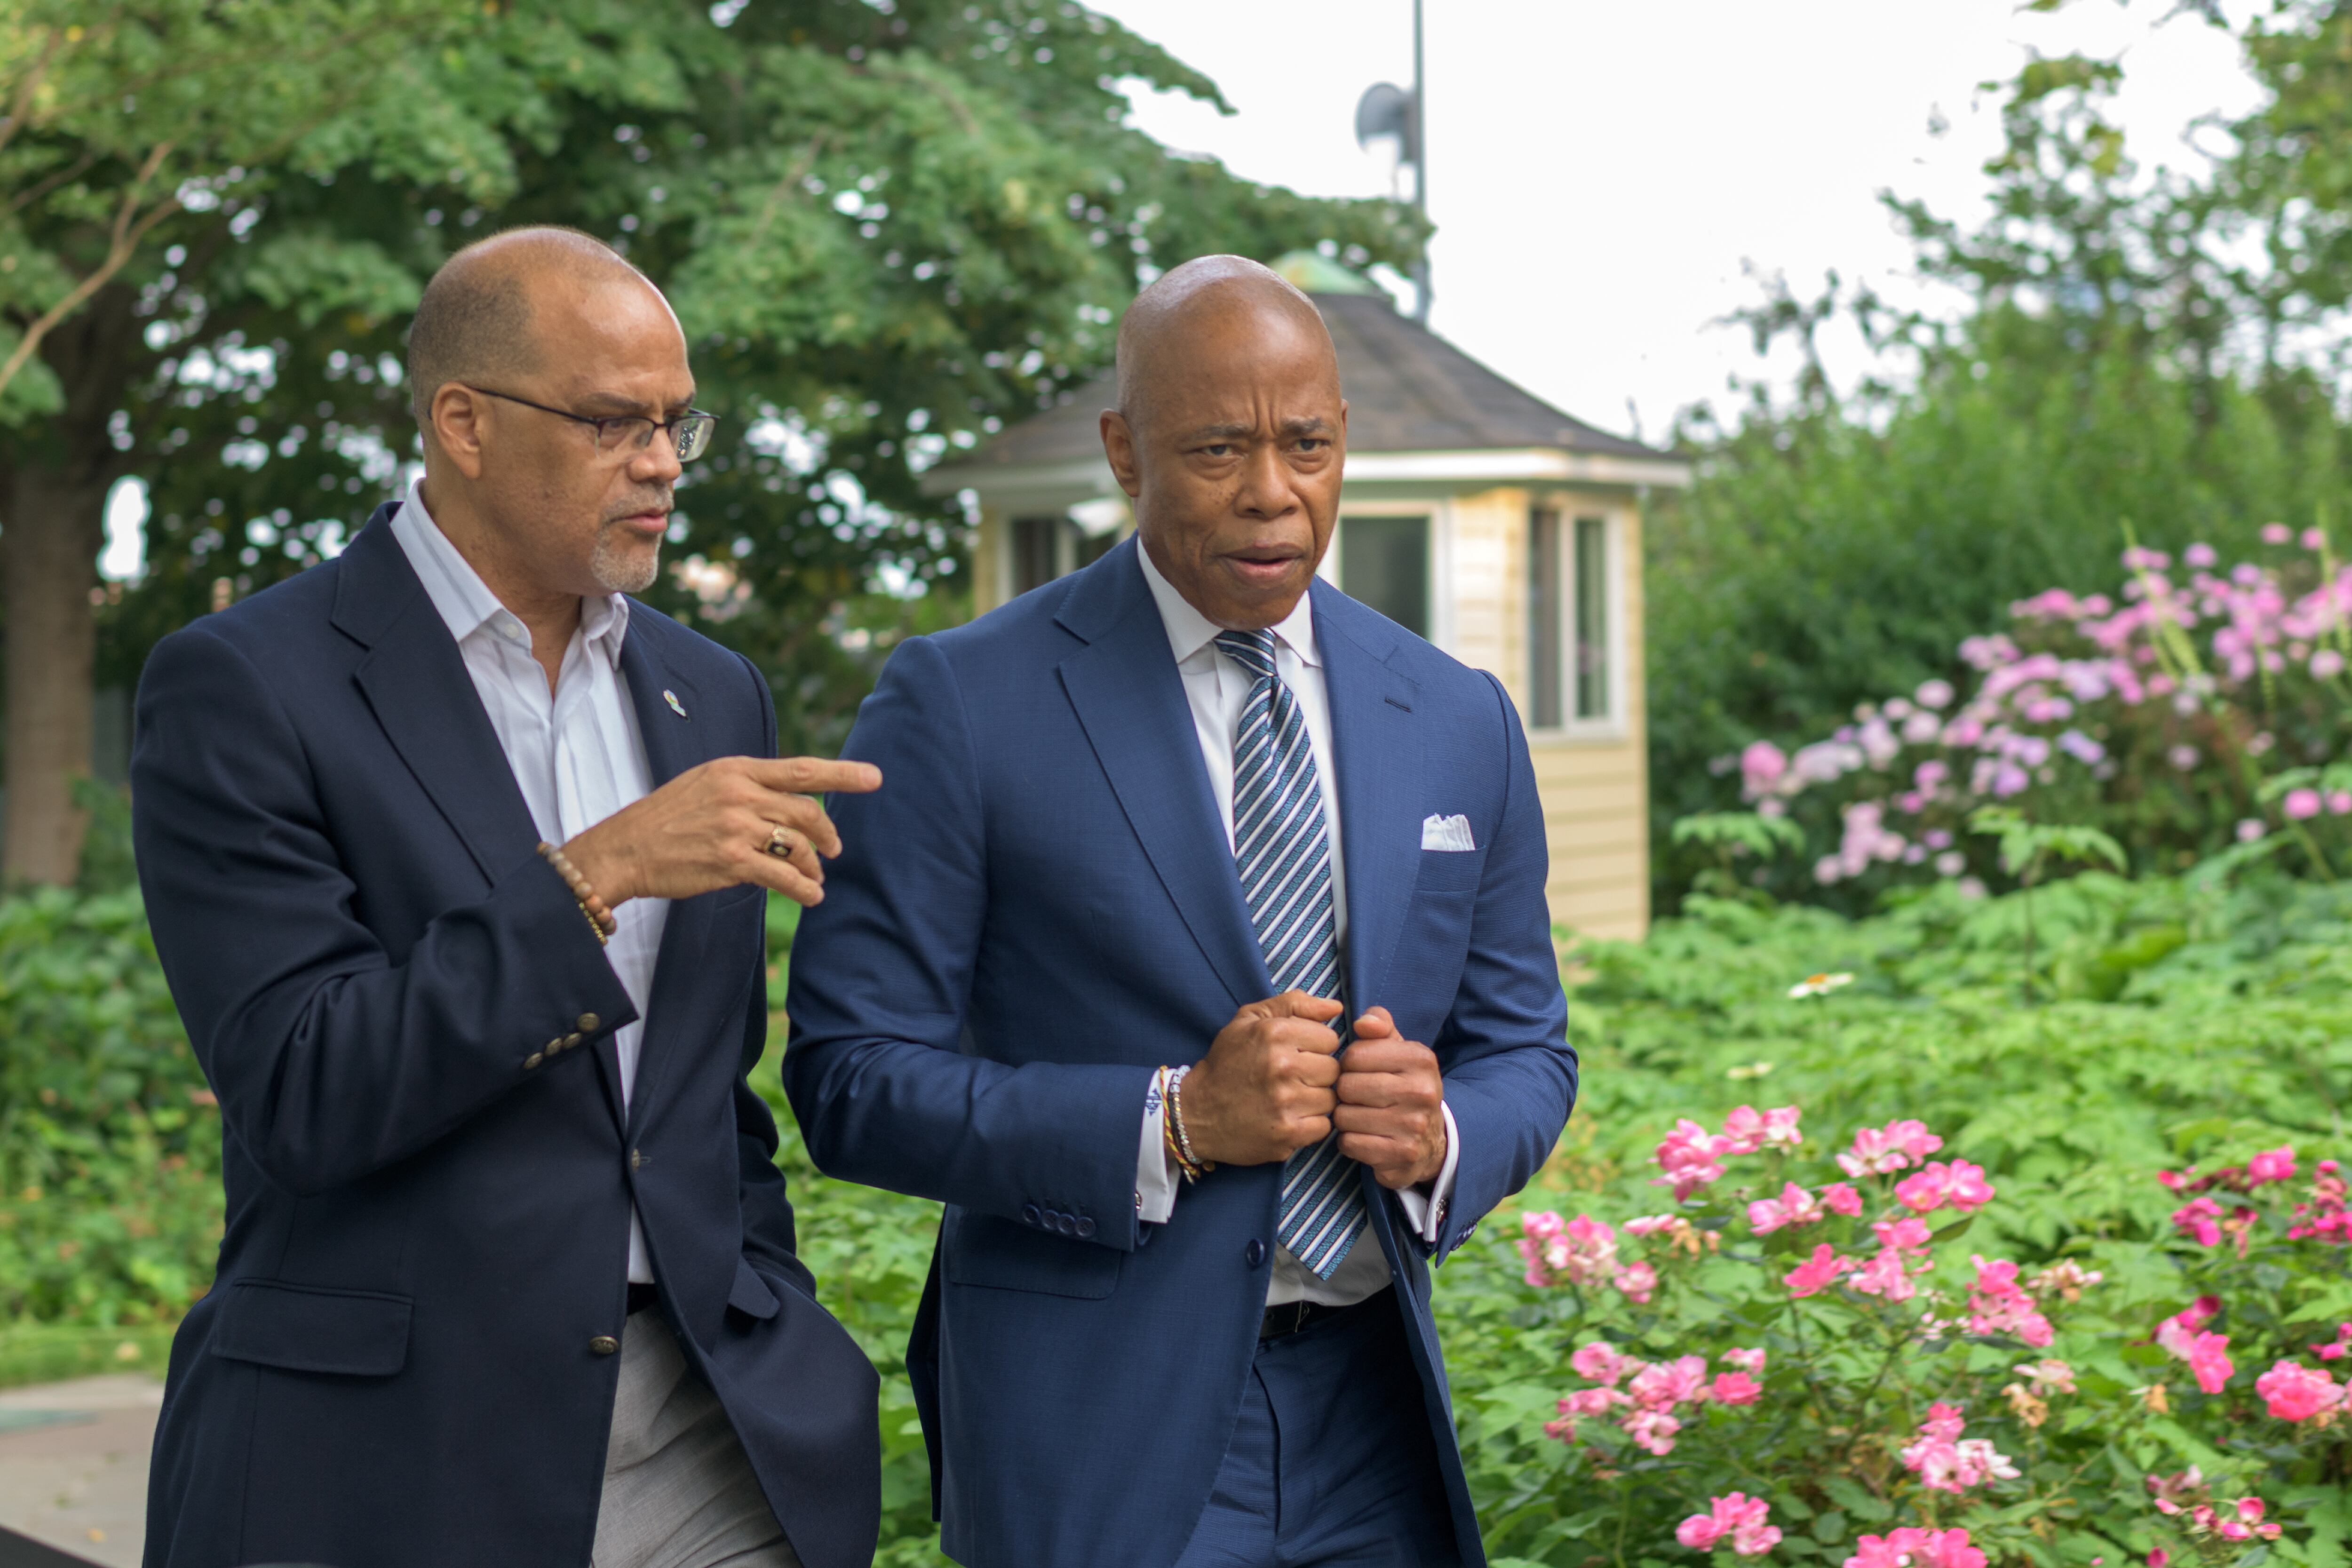 New York City Mayor Eric Adams and the New York City Department of Education’s (DOE) Office of Family and Community Empowerment host an appreciation reception in honor of parent leaders at Gracie Mansion on Tuesday, June 20, 2023.